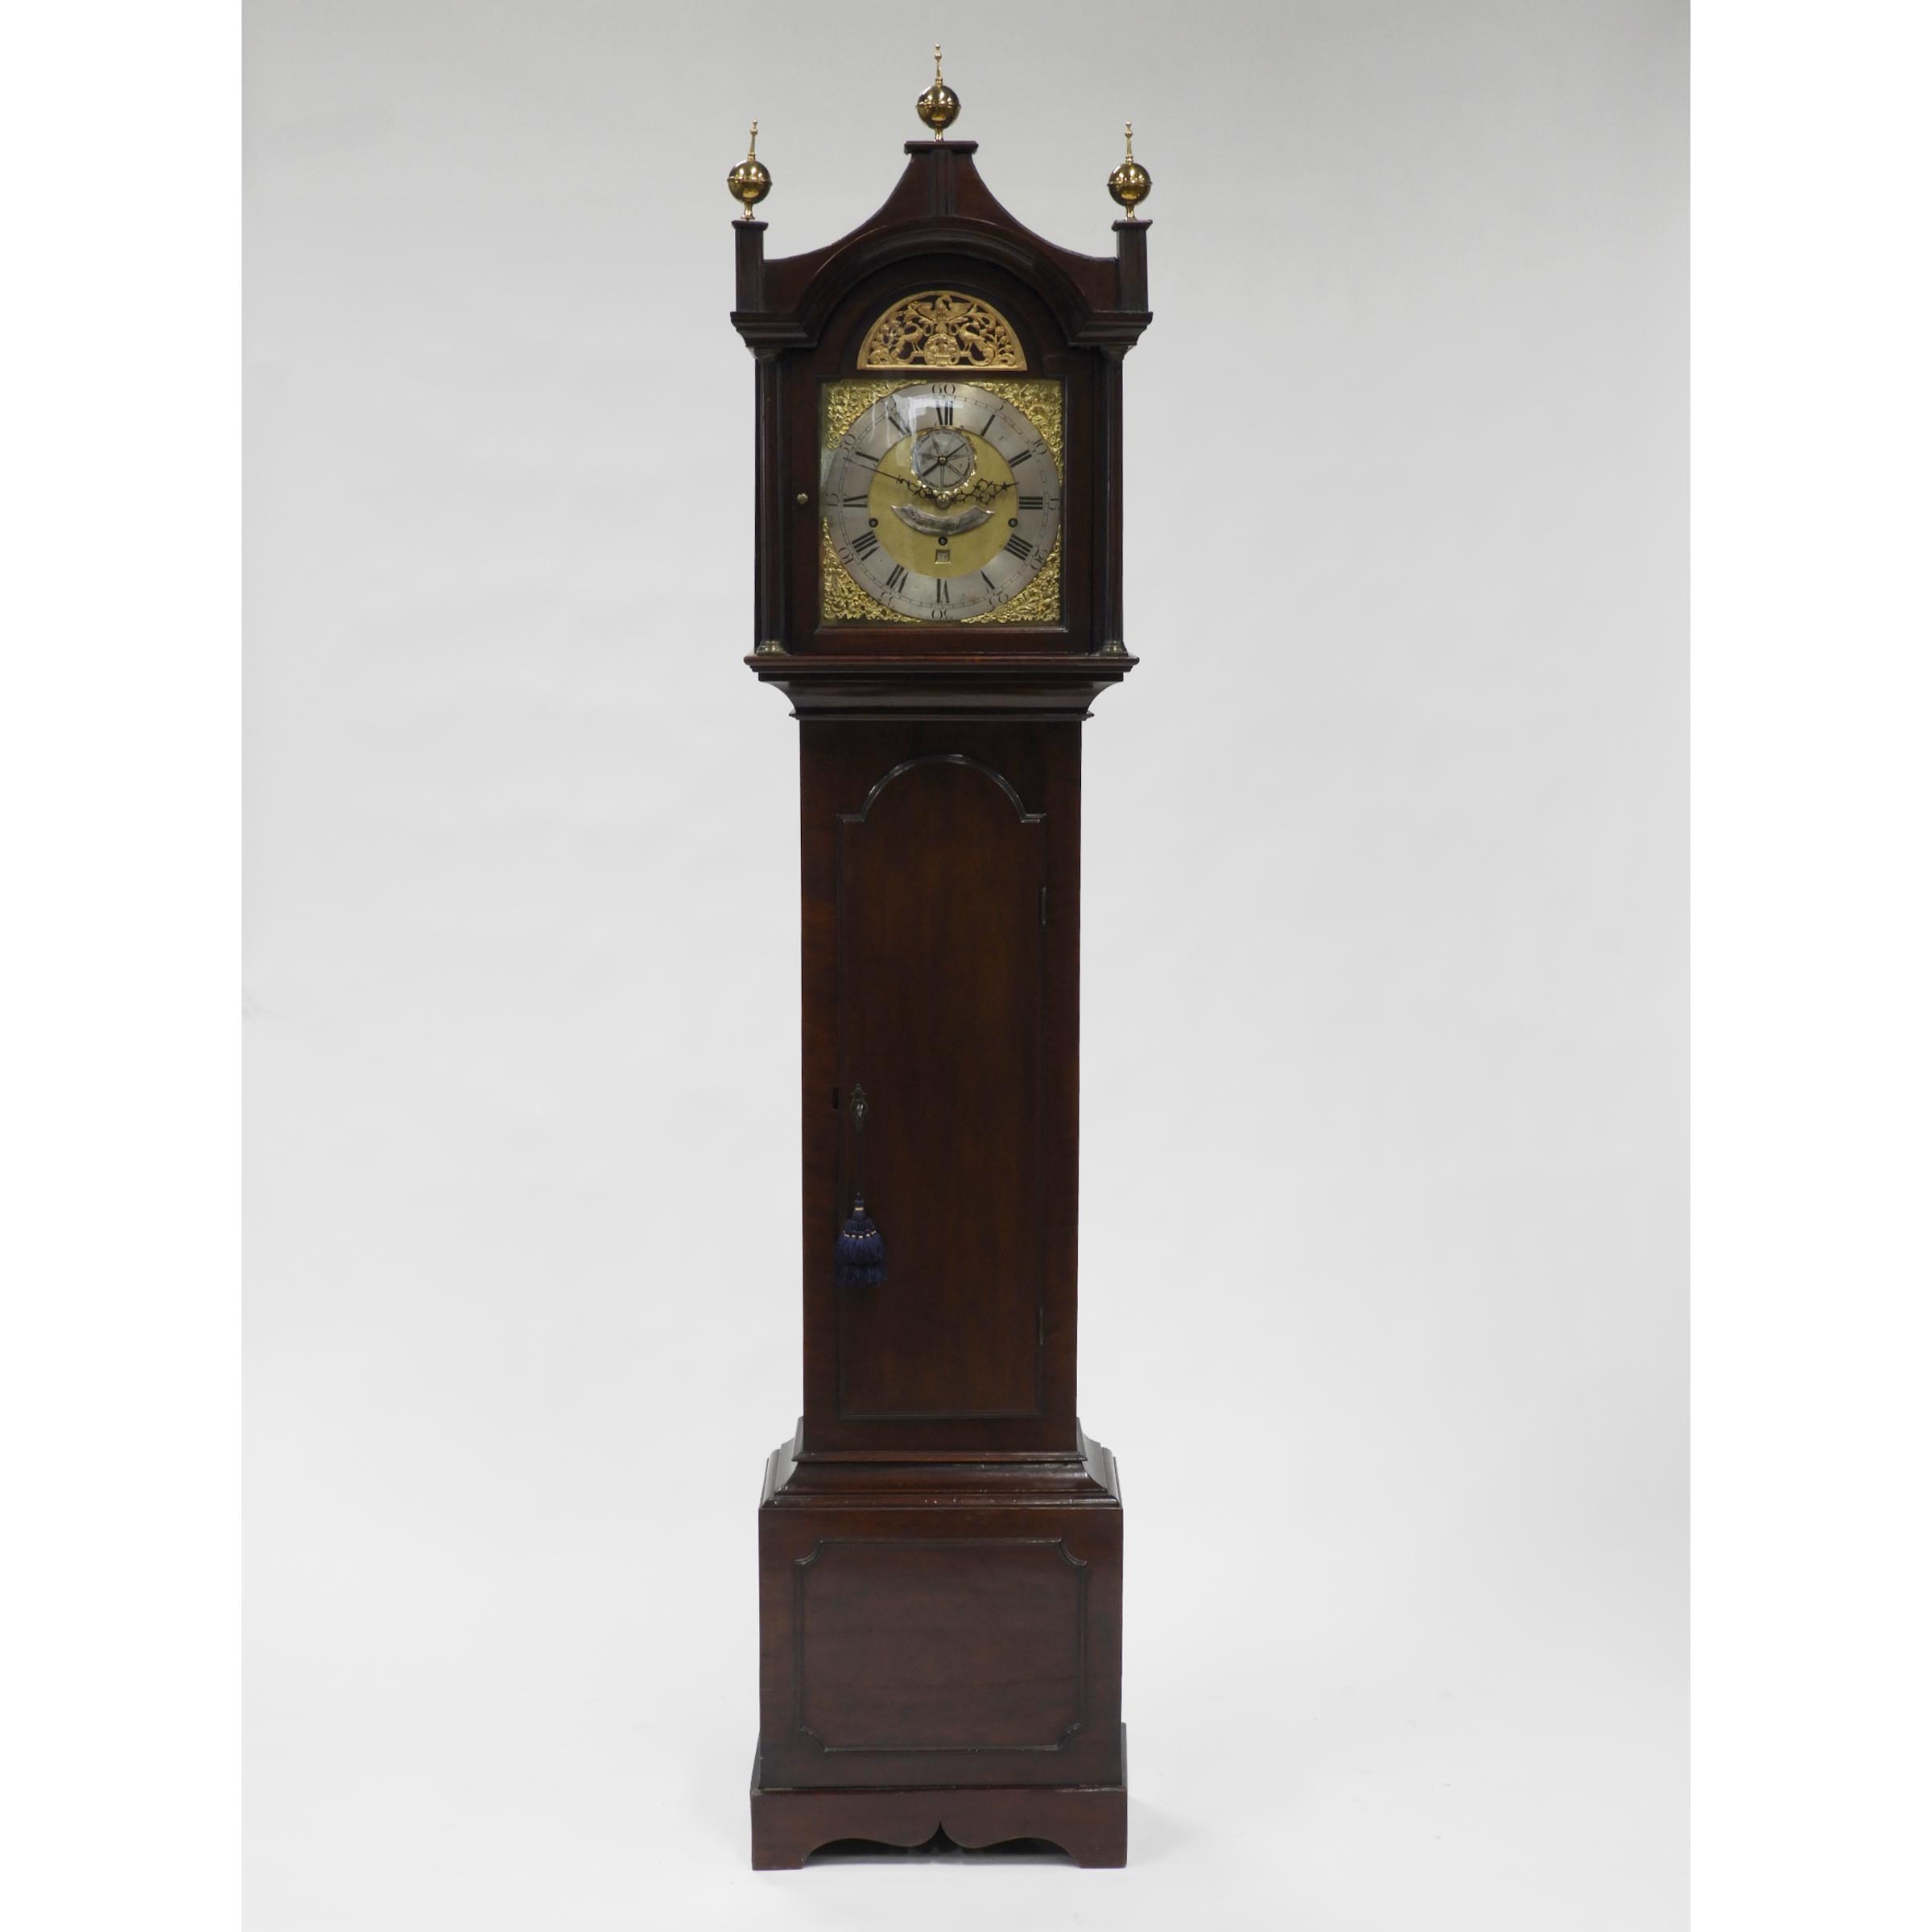 English Mahogany Quarter Striking Musical Tall Case Clock, William Hewett, London, early-mid 18th century and later